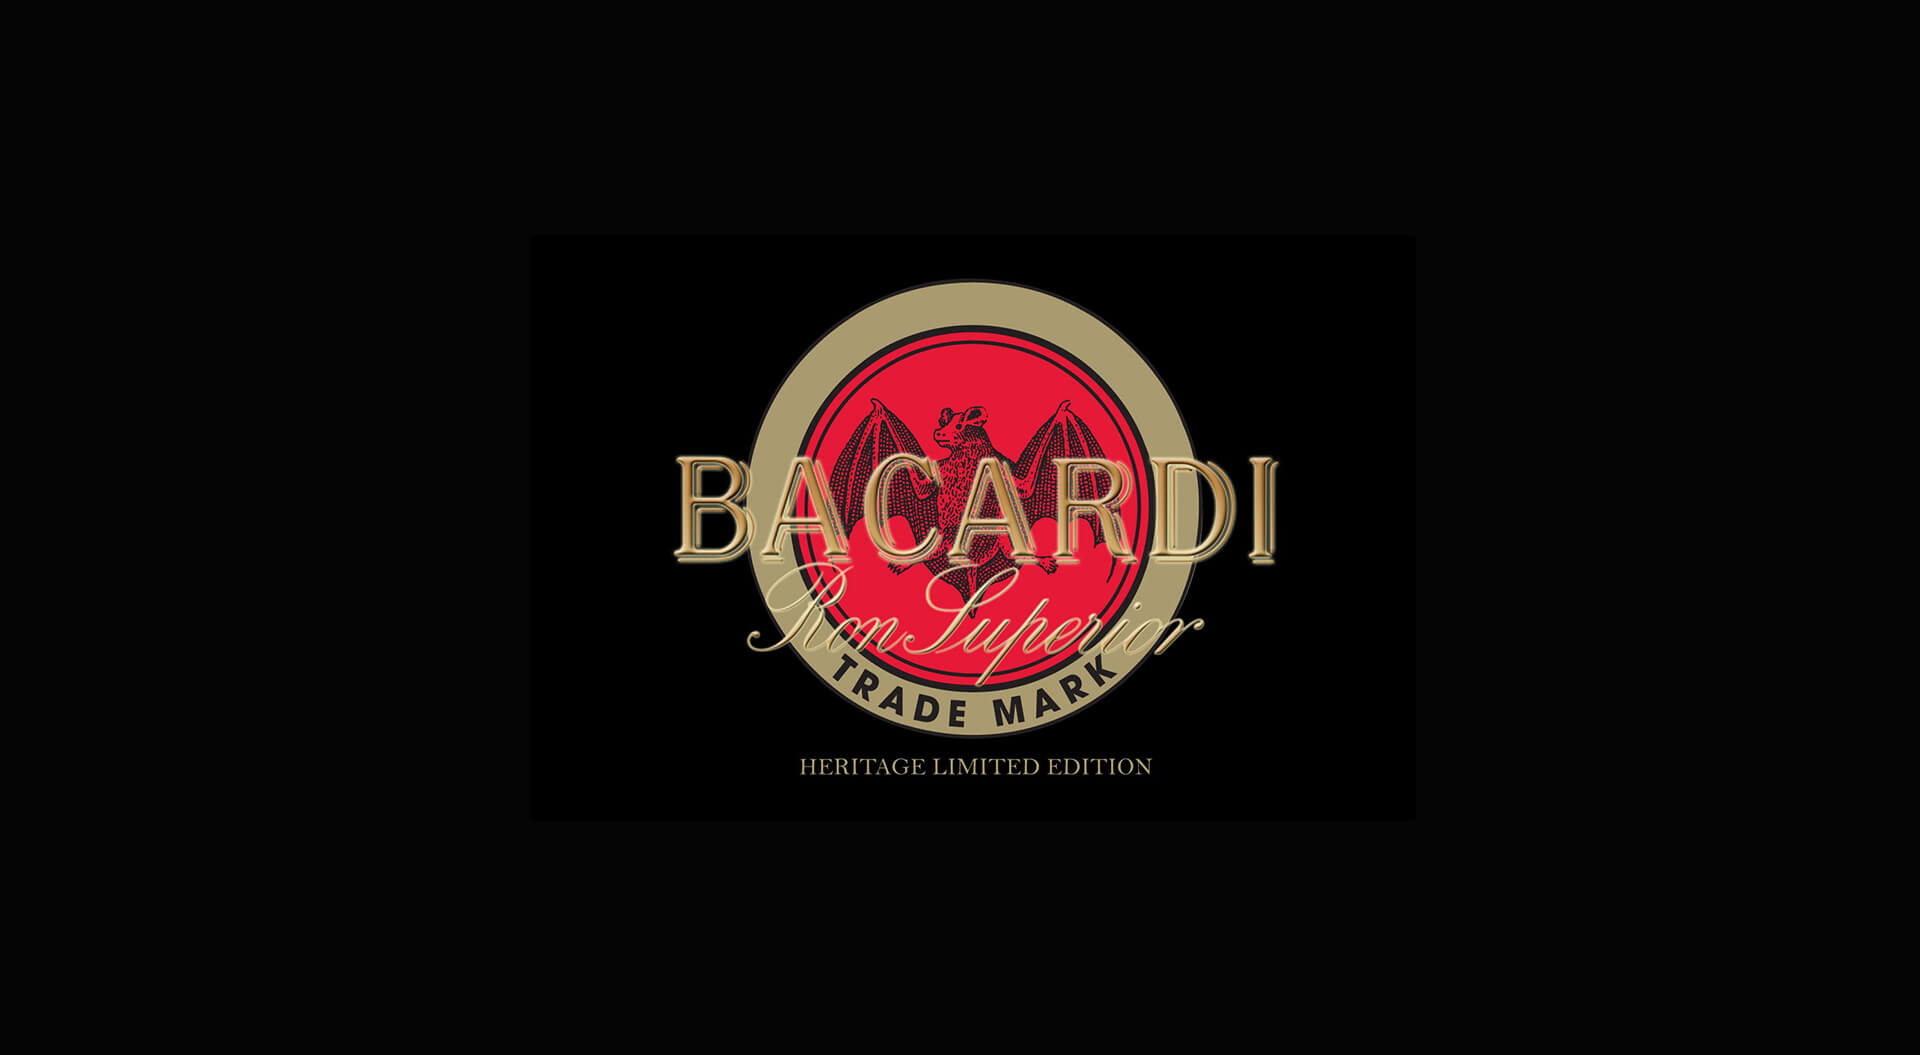 Bacardi Heritage Ron Superior Limited Edition Spirits industry brand identity and promotion campaign Global Travel Retail, 